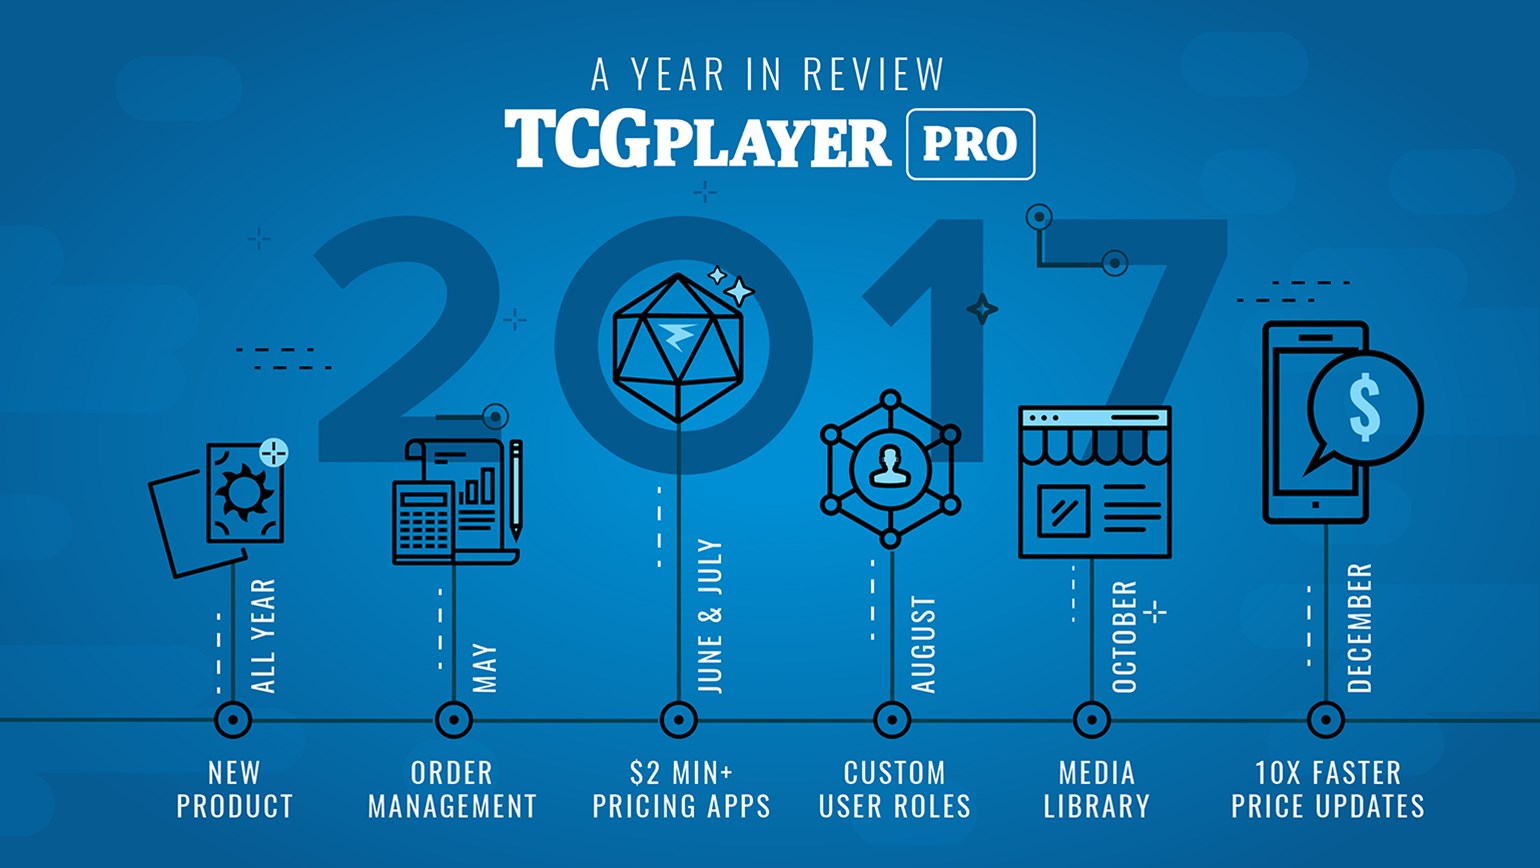 TCGplayer Pro: A Year in Review